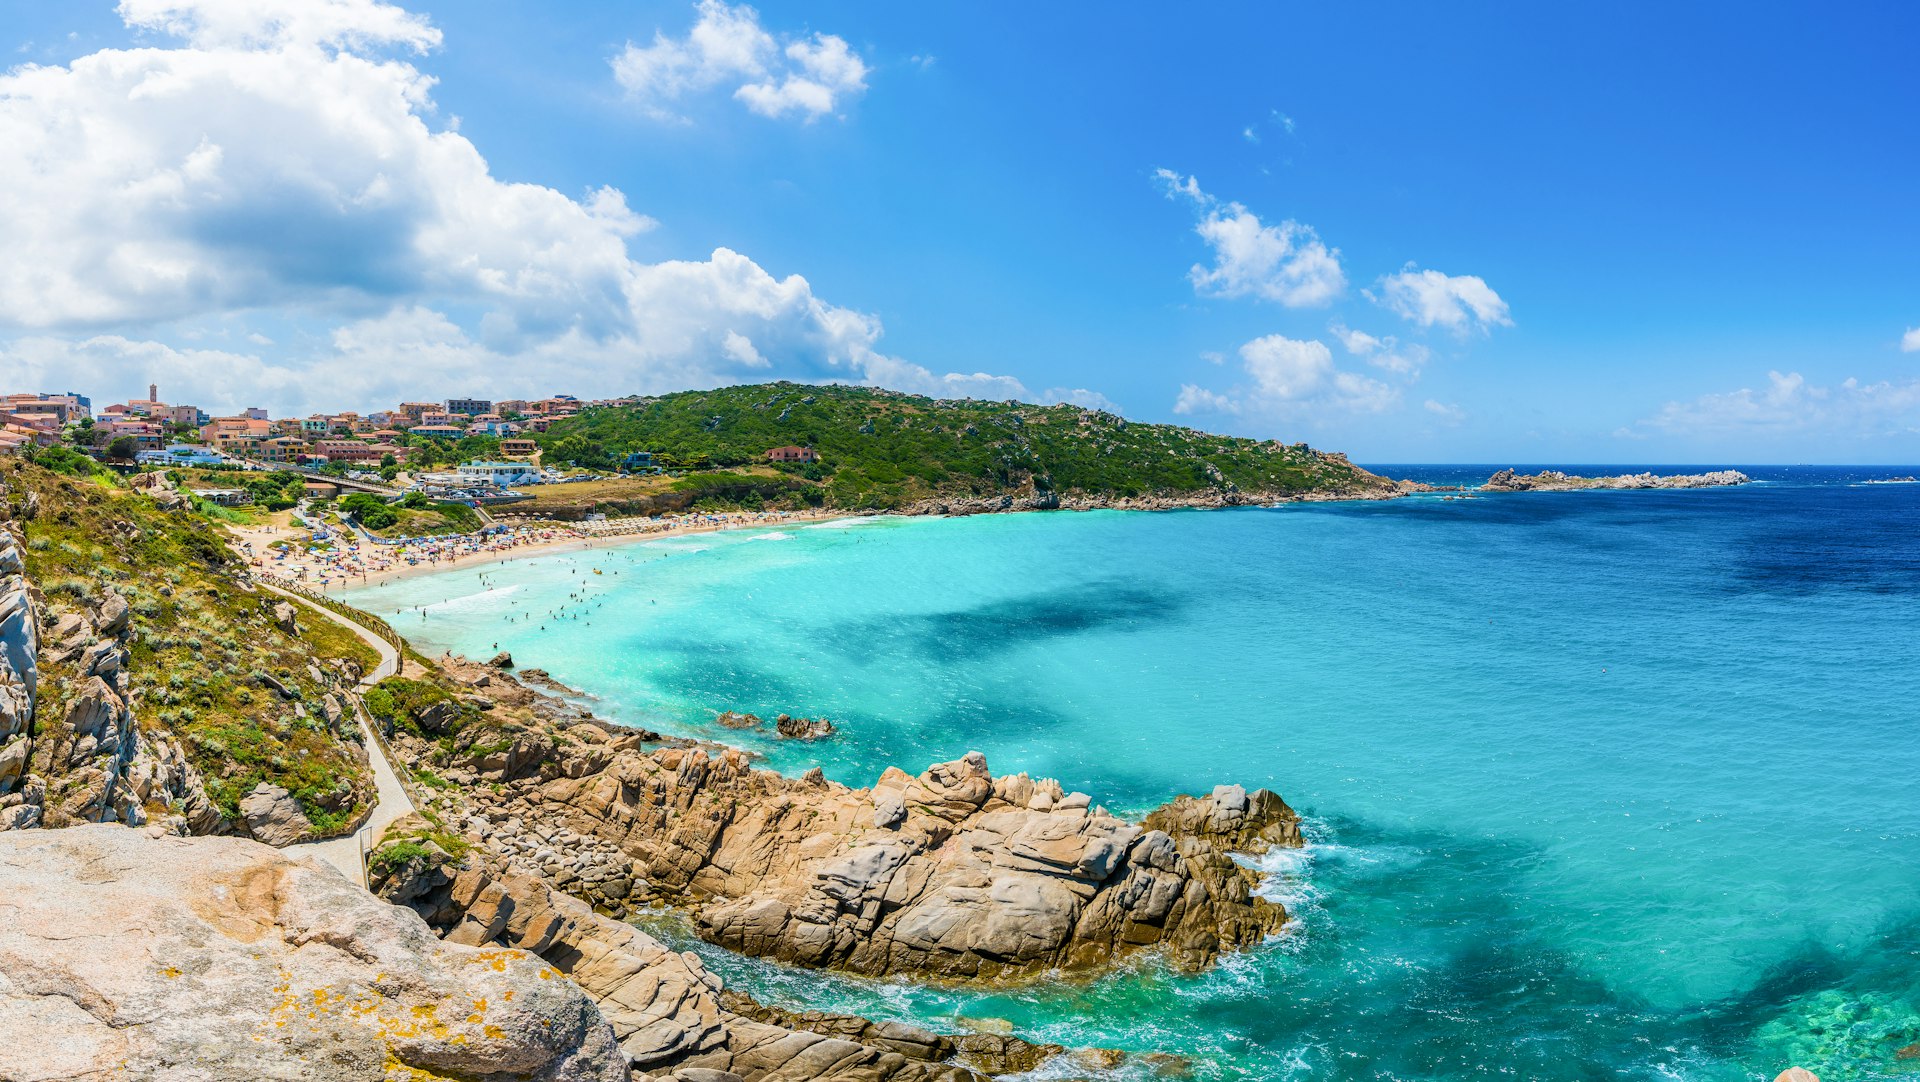 A wide angled view of a large cove with shallow pale blue waters and a golden stretch of beach which is full of people.